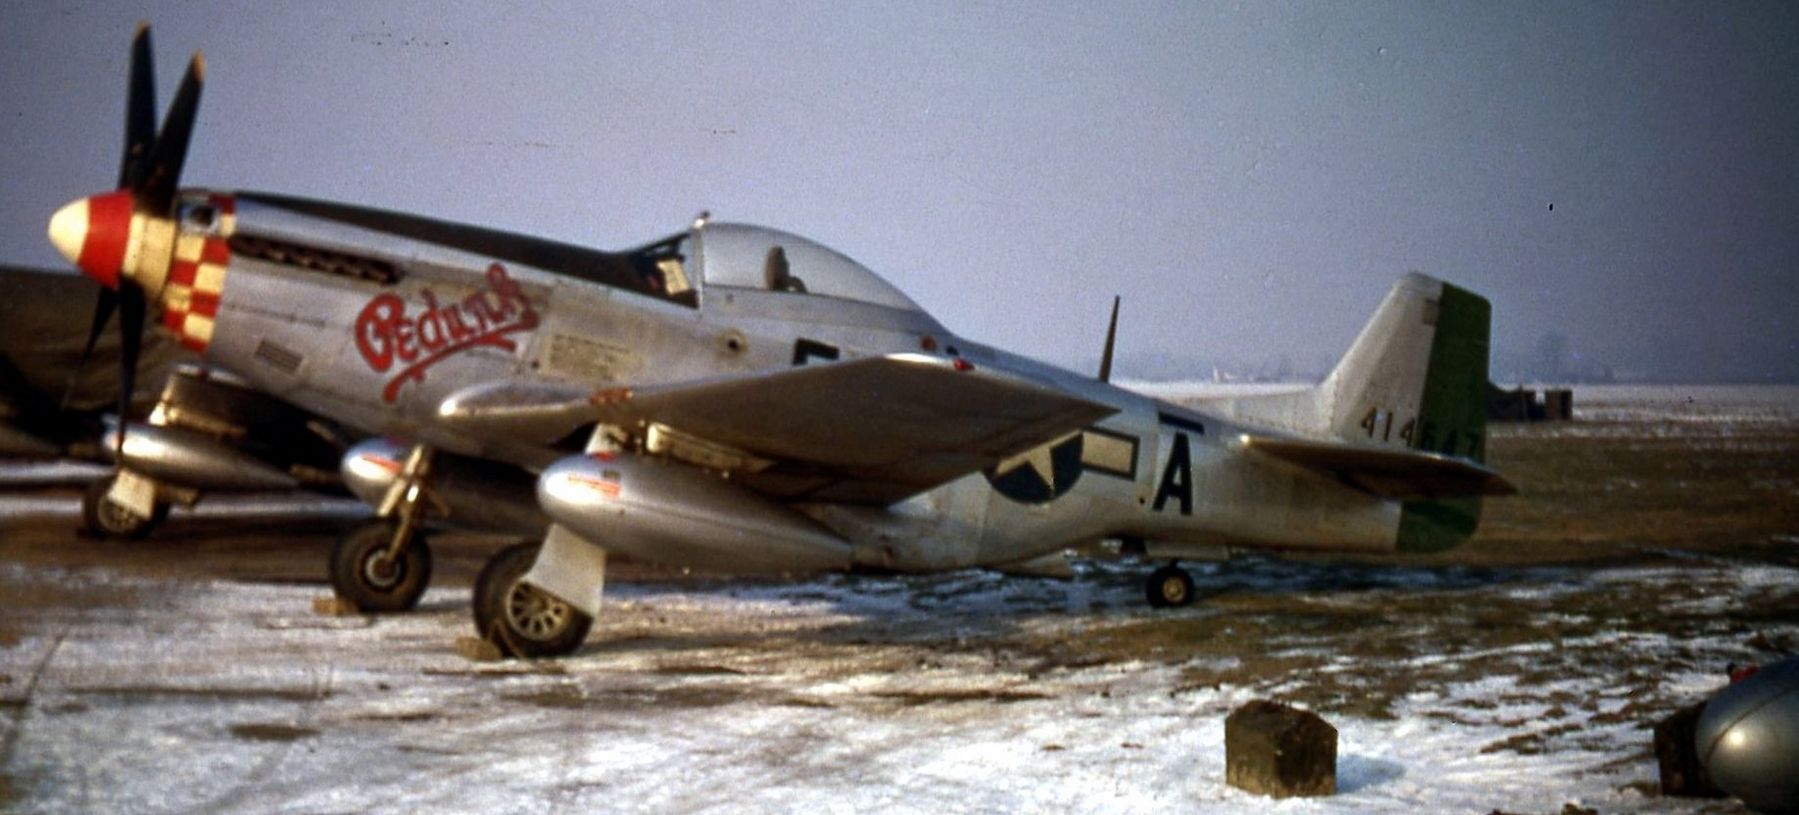 P-51D 44-14647 5Q-A "Pedunk" of the 339th Fighter Group's 504th Fighter Squadron image. Click for full size.